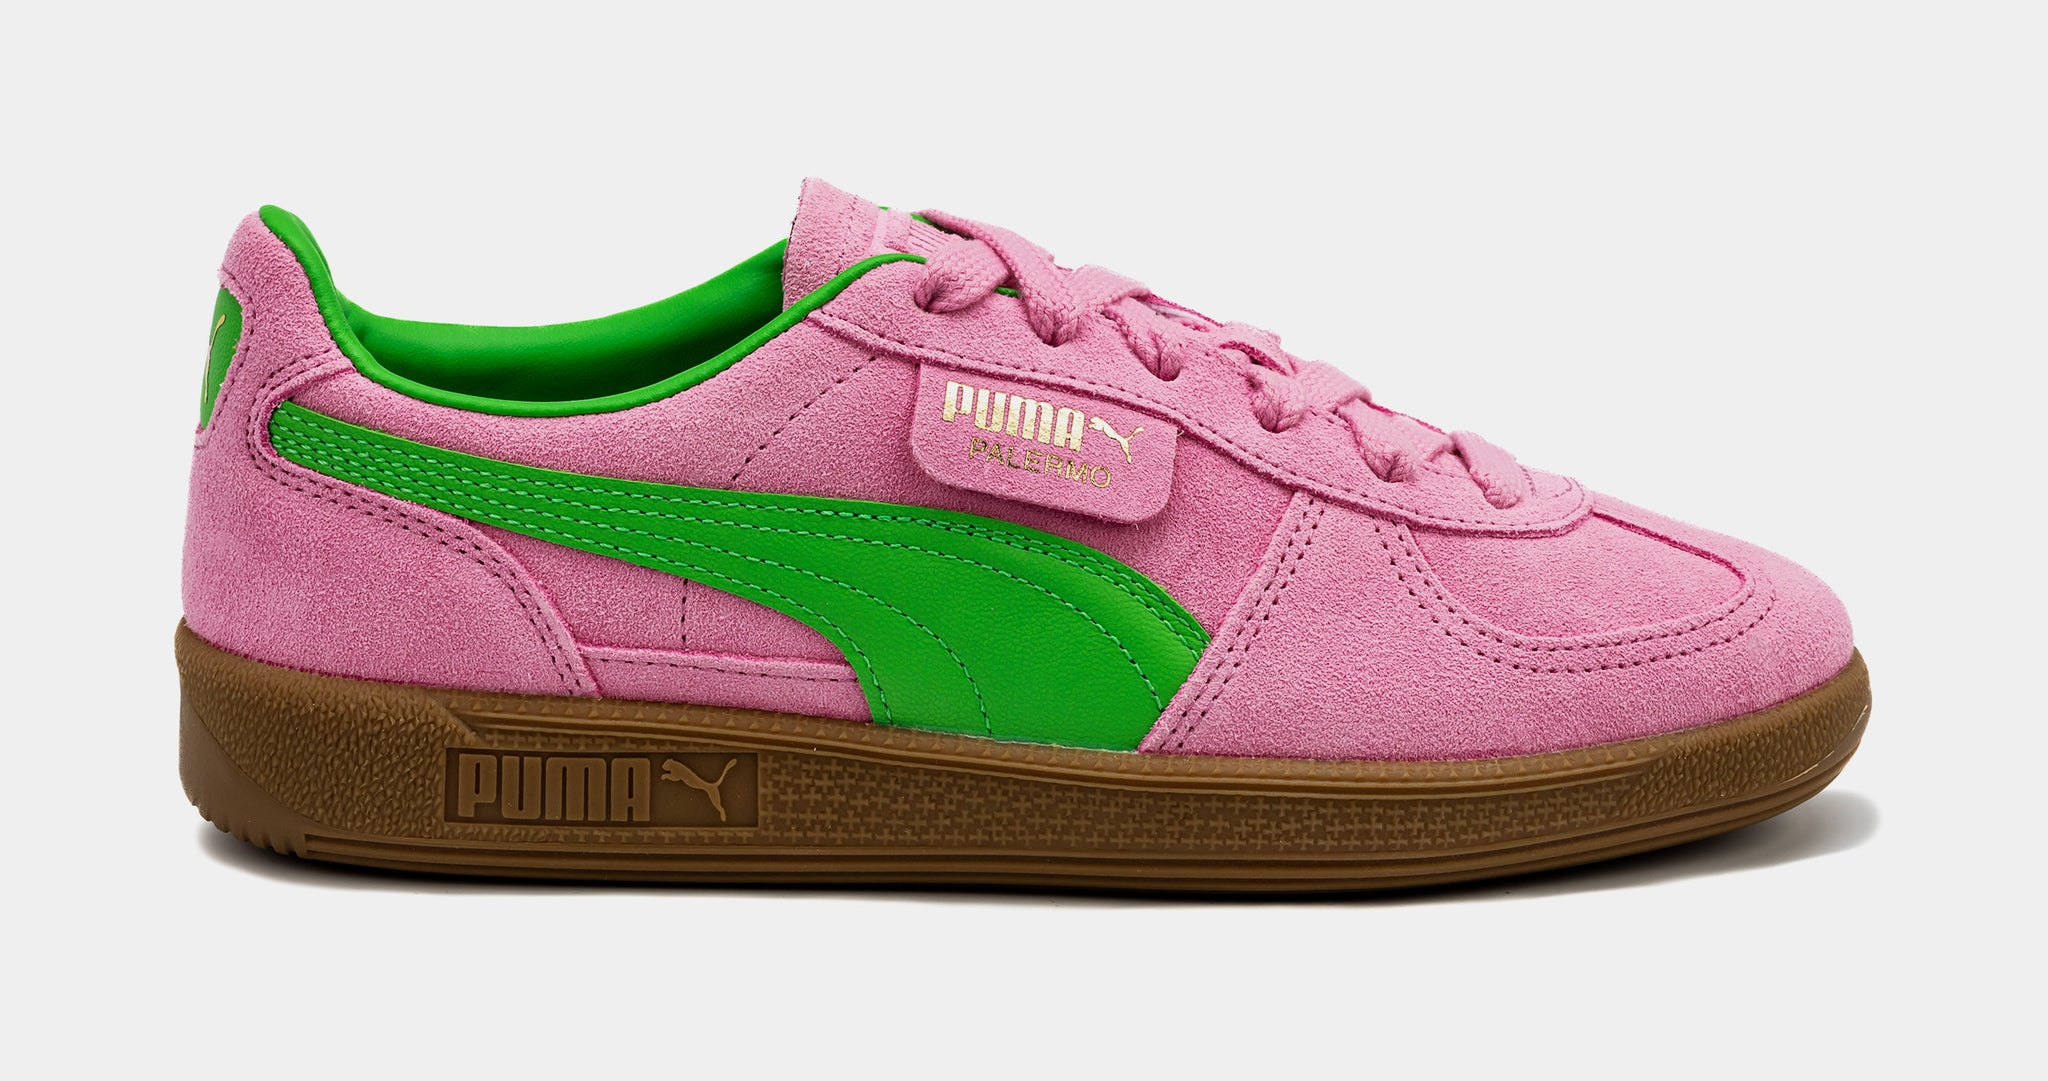 PUMA Palermo Special Womens Lifestyle Shoes Pink Green 397858 01 – Shoe  Palace